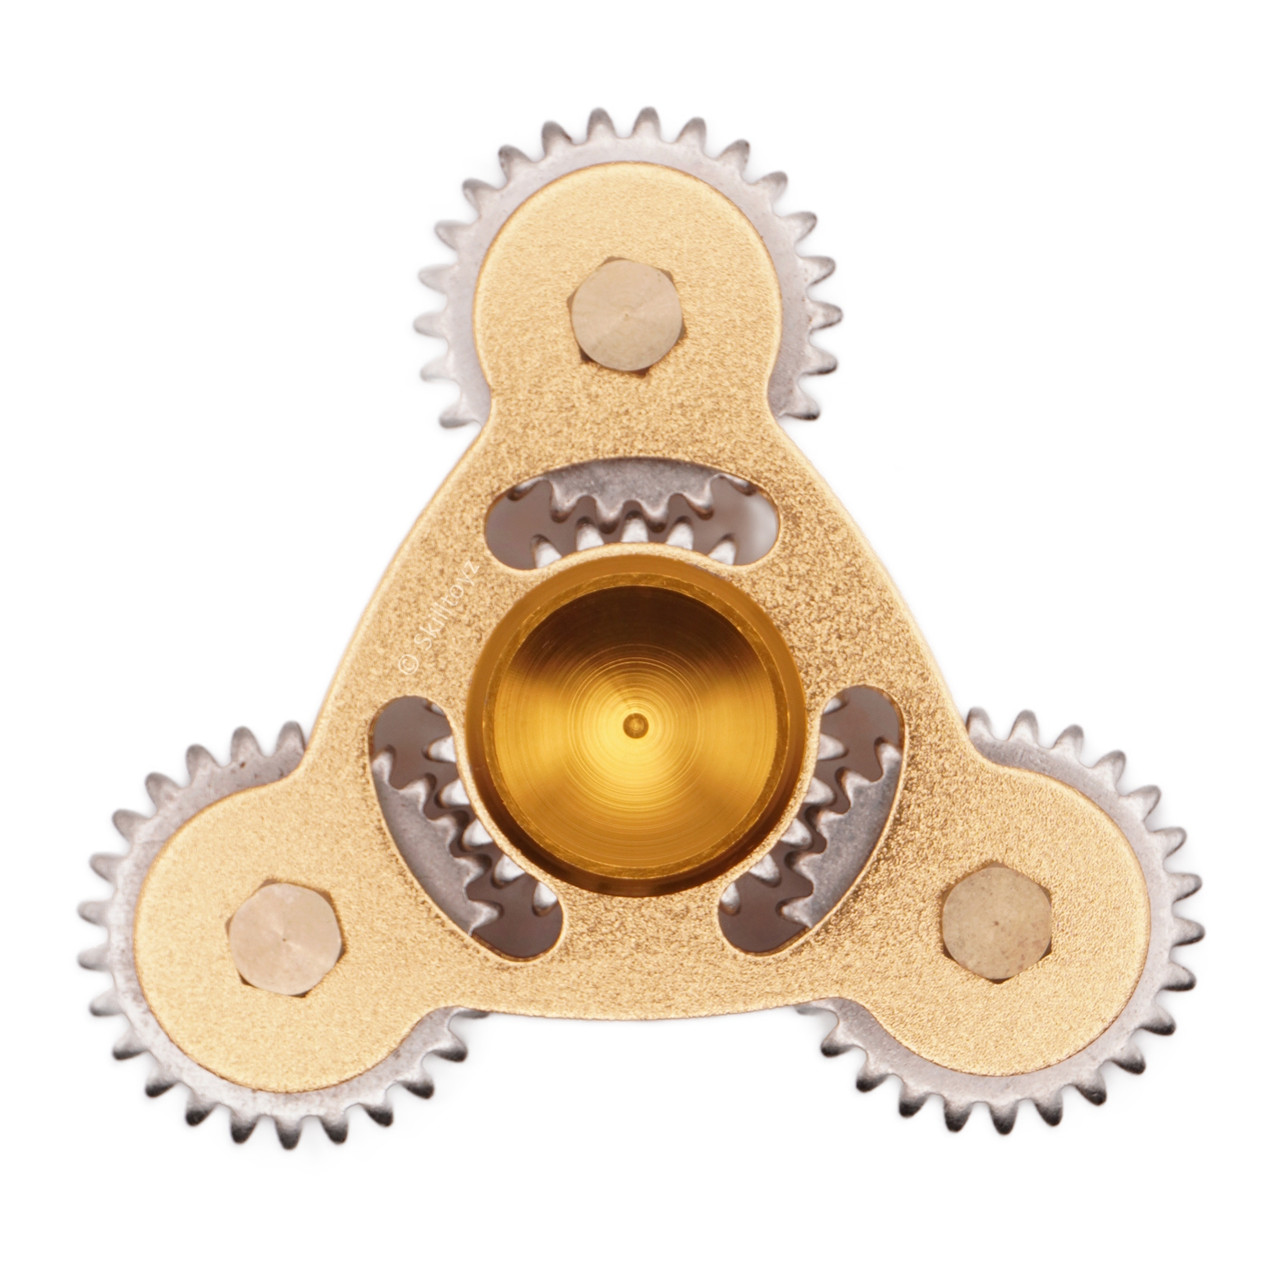 Fidget Spinner Metal Wheel Shaped Hand Toy, Father gift, Stress - Gold